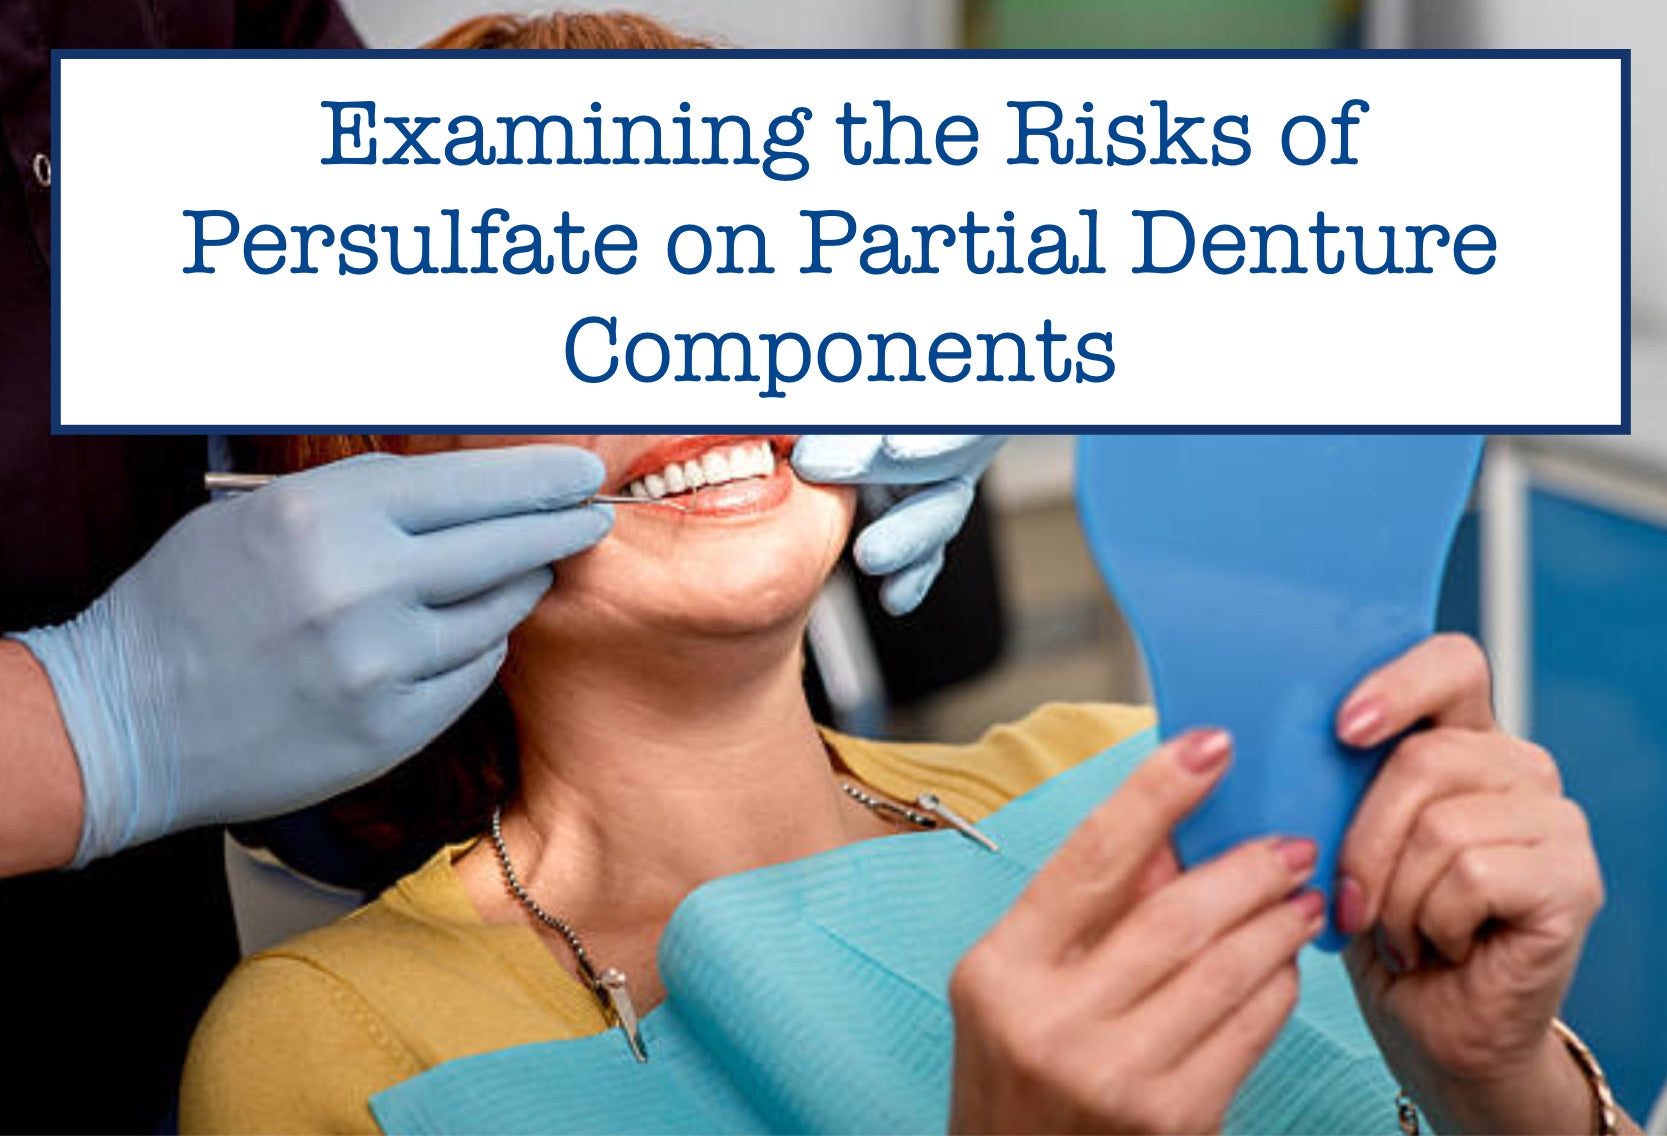 Examining the Risks of Persulfate on Partial Denture Components